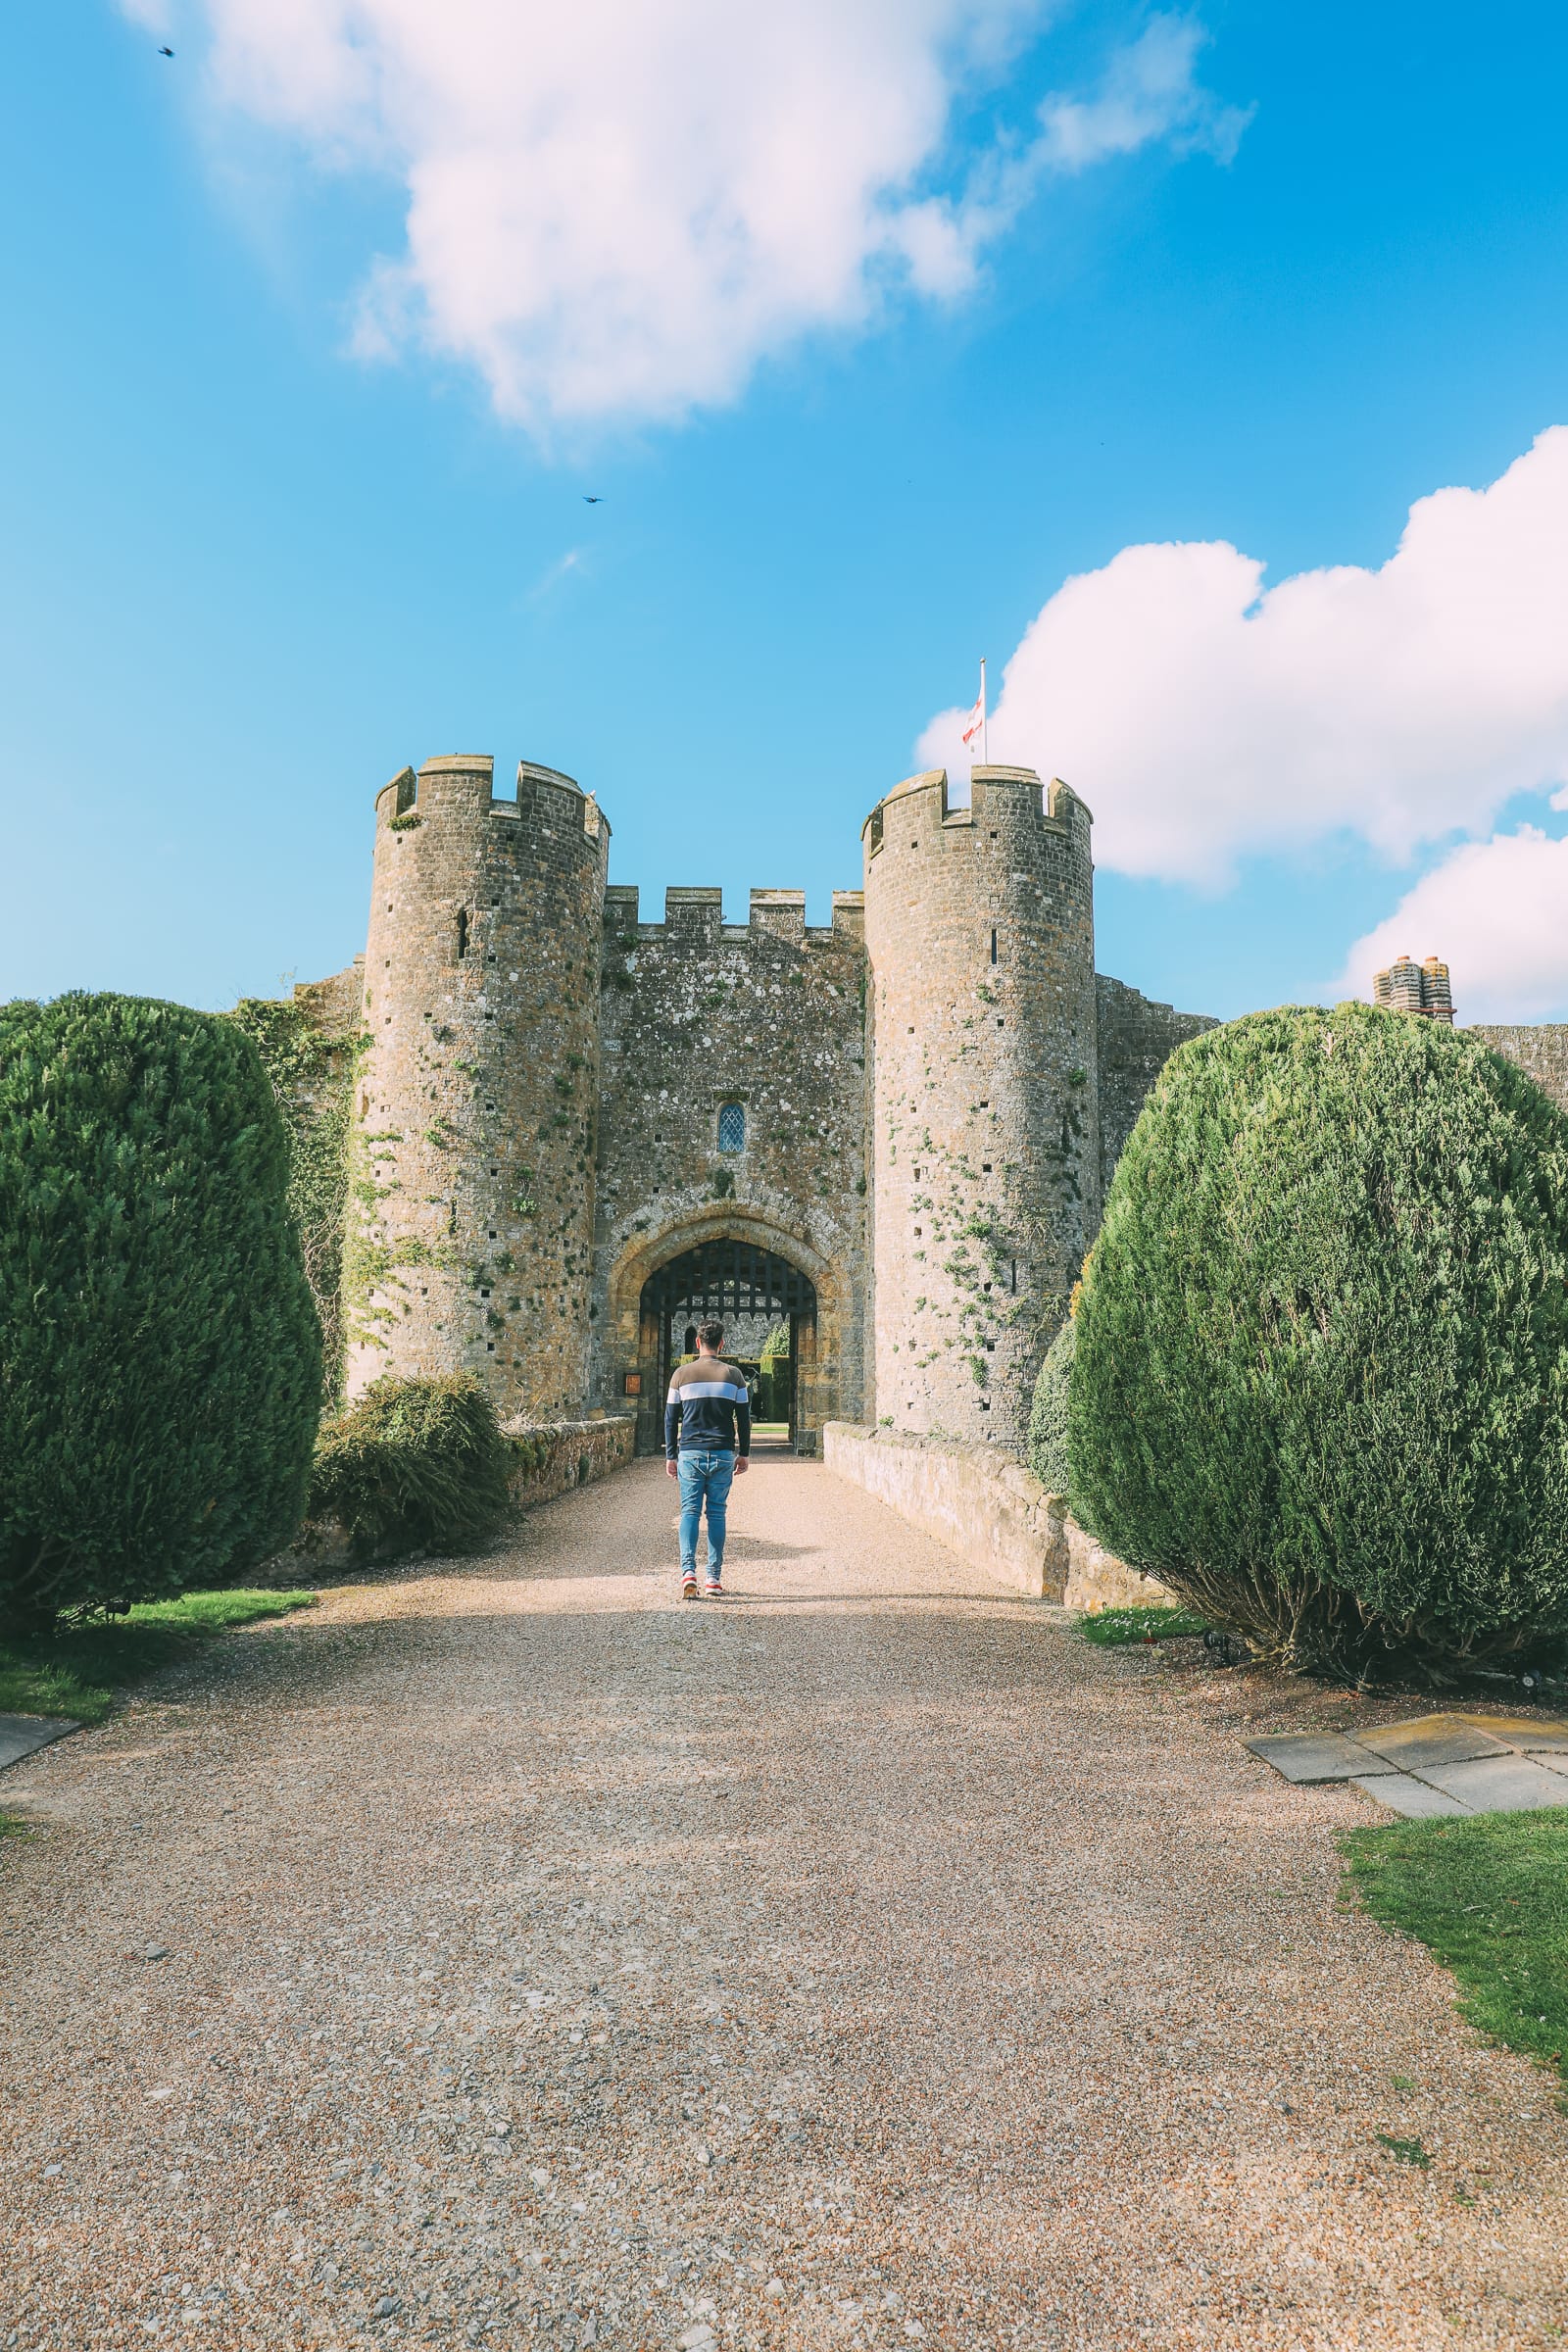 amberley-castle-staying-in-a-1-000-year-old-castle-england-hand